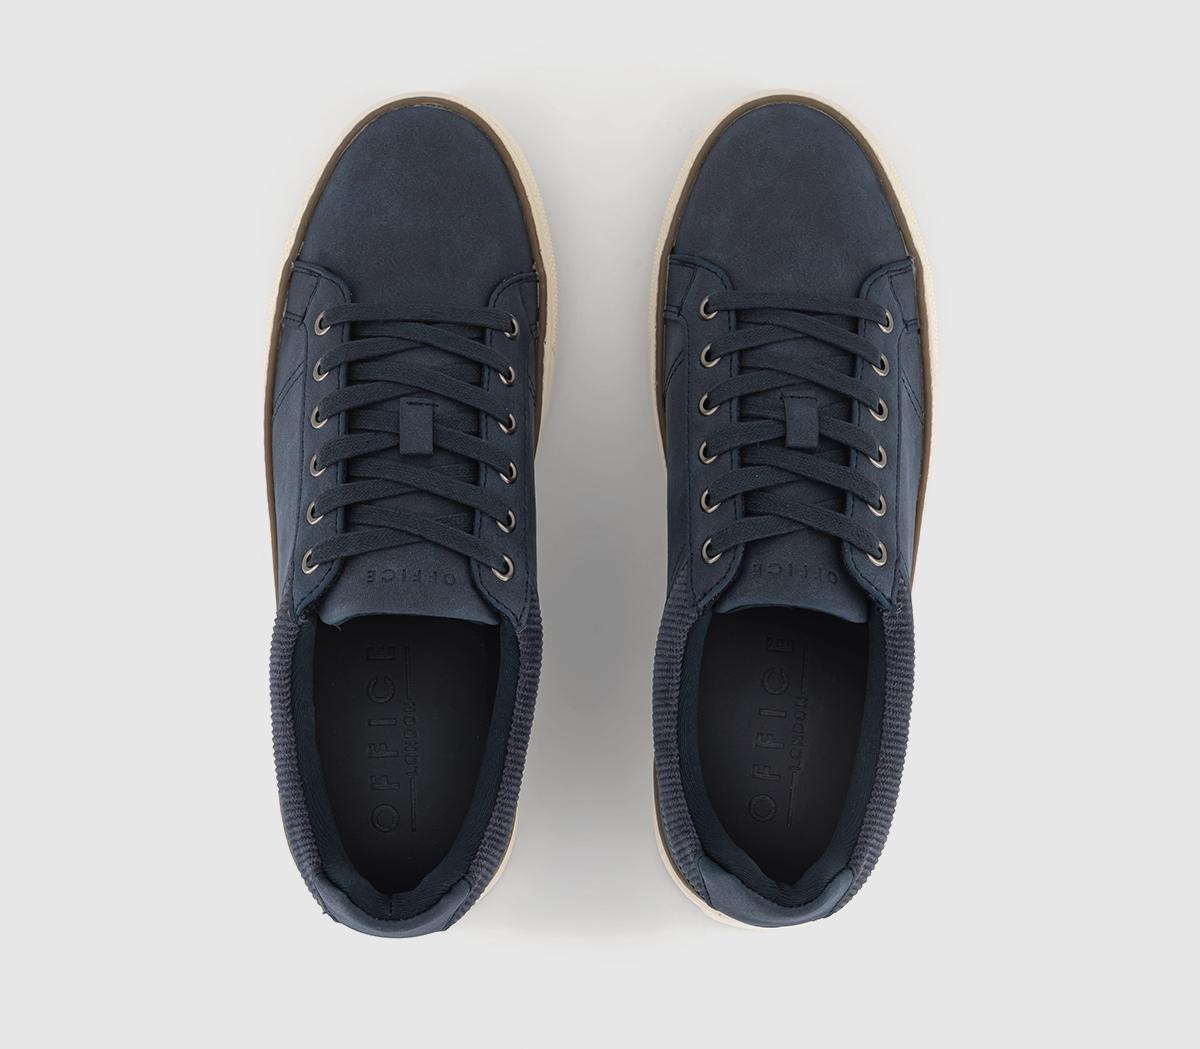 OFFICE Chatsworth Cord Collar Trainers Navy - Men's Casual Shoes